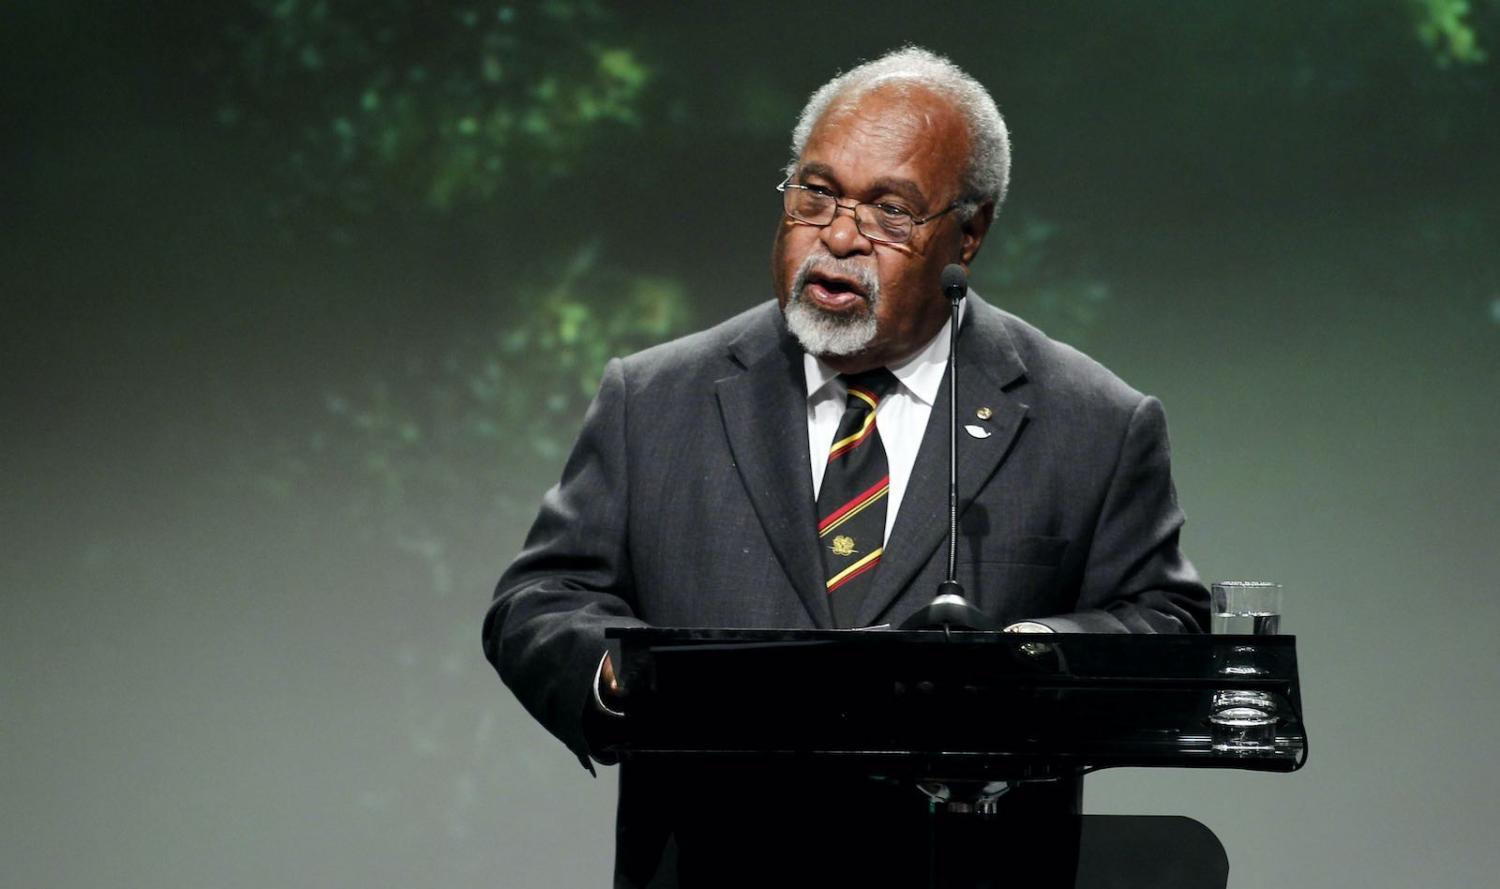 Michael Somare while PNG prime minister in 2010 addresses the Climate and Forest Conference in Oslo (Hakon Mosvold Larsen via Getty Images)